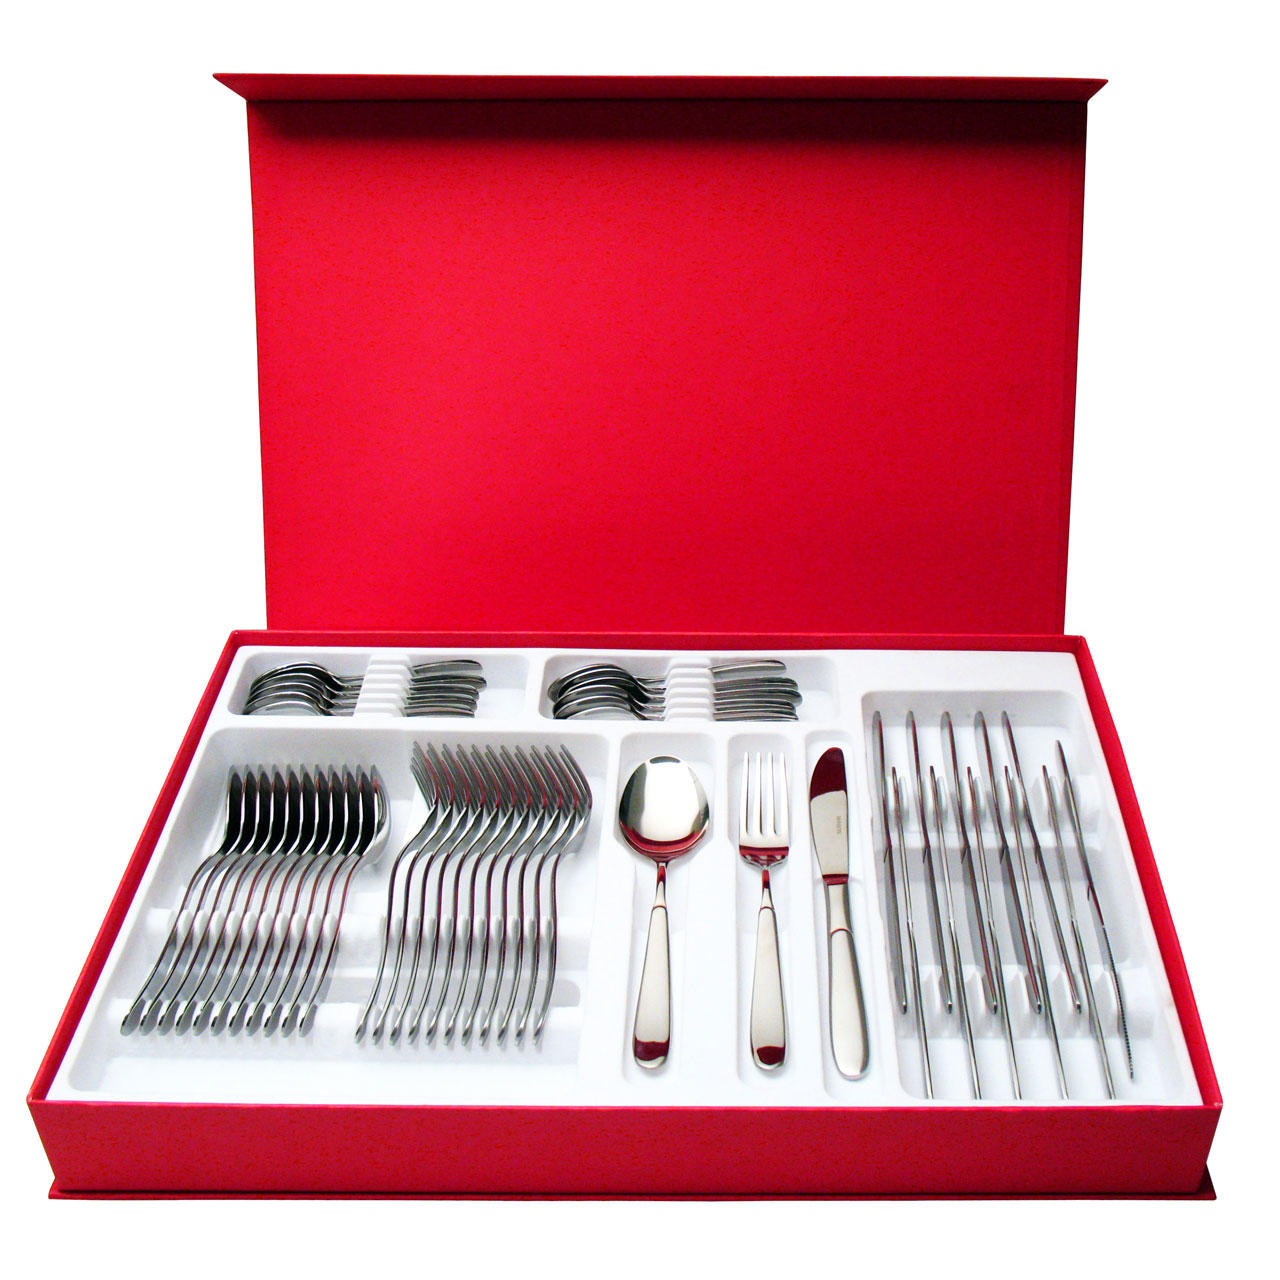 66401148 48 pcs. cutlery set 18/10 stainless steel Design Case 